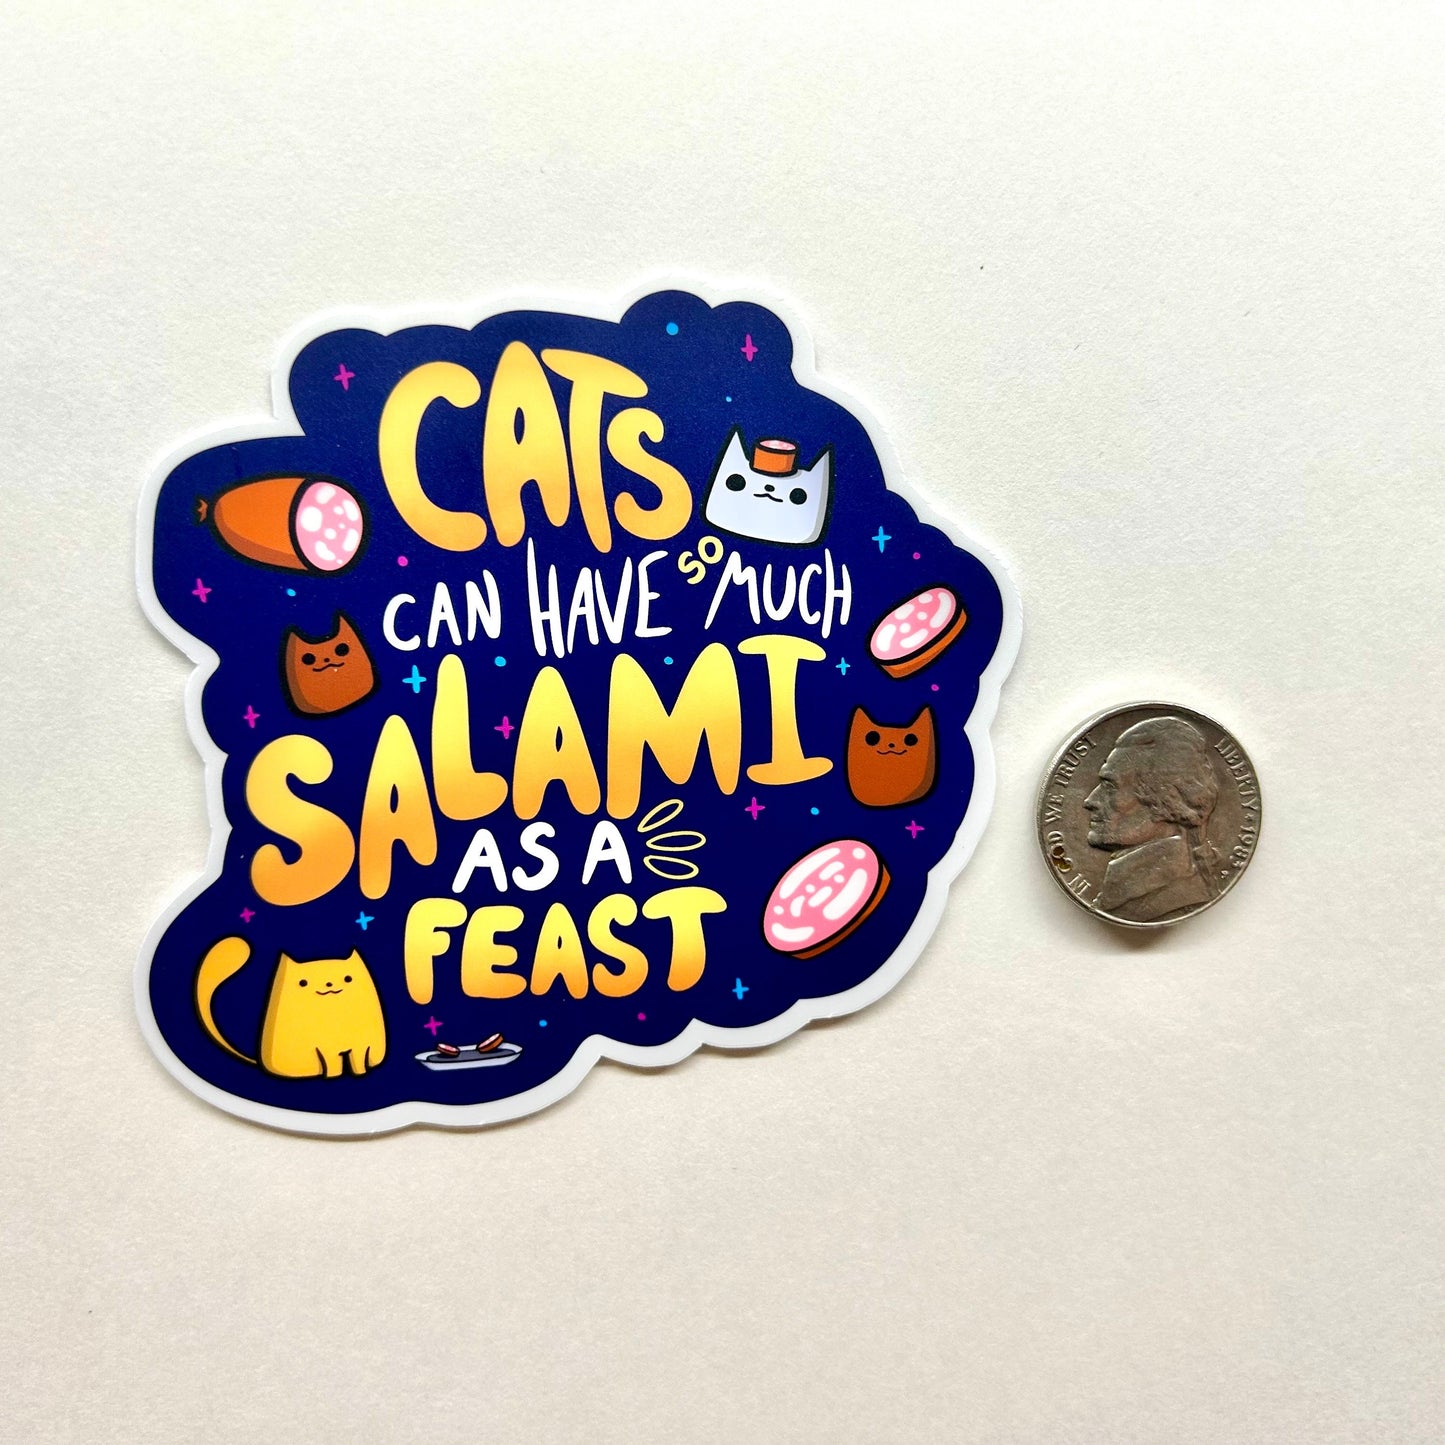 Cats Can Have So Much Salami Meme Sticker - Perfect for Cat Lovers, Sticker Enthusiasts, and Laptop Decoration